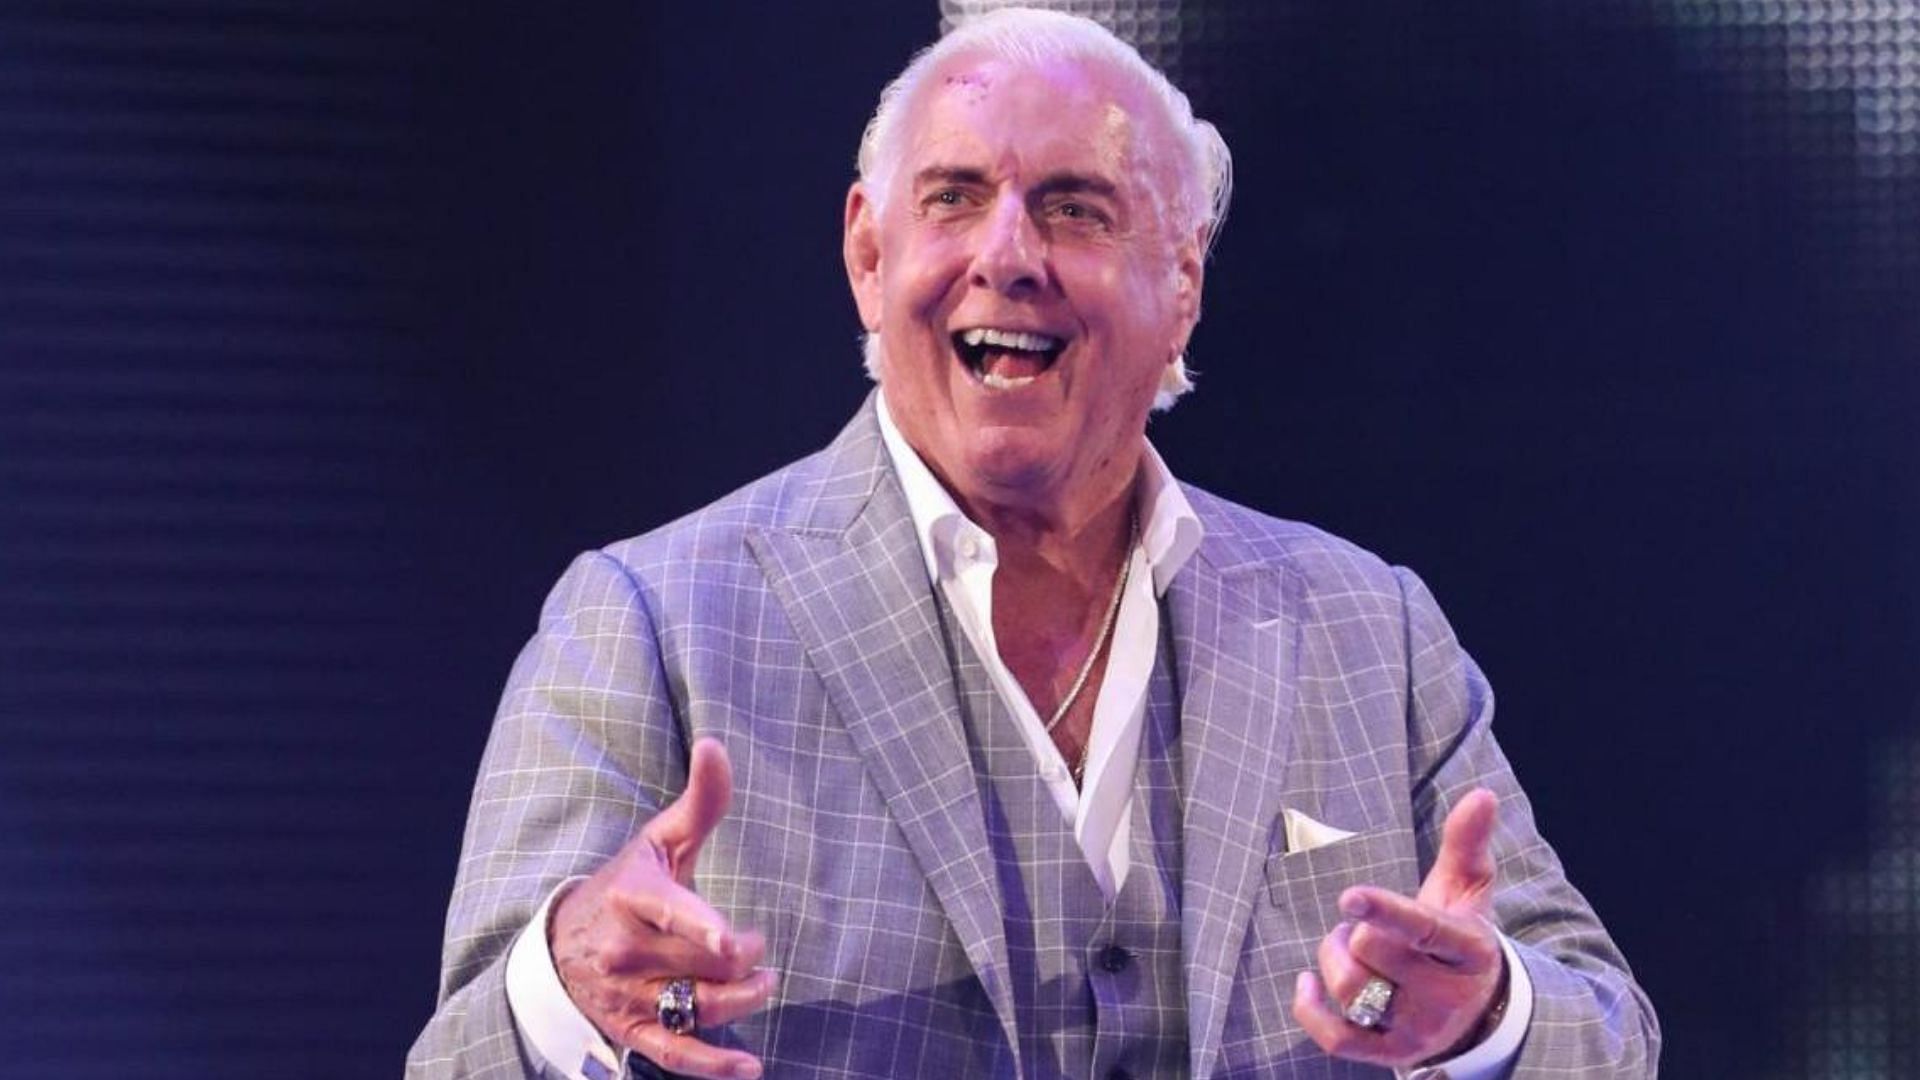 Ric Flair during a WWE appearance